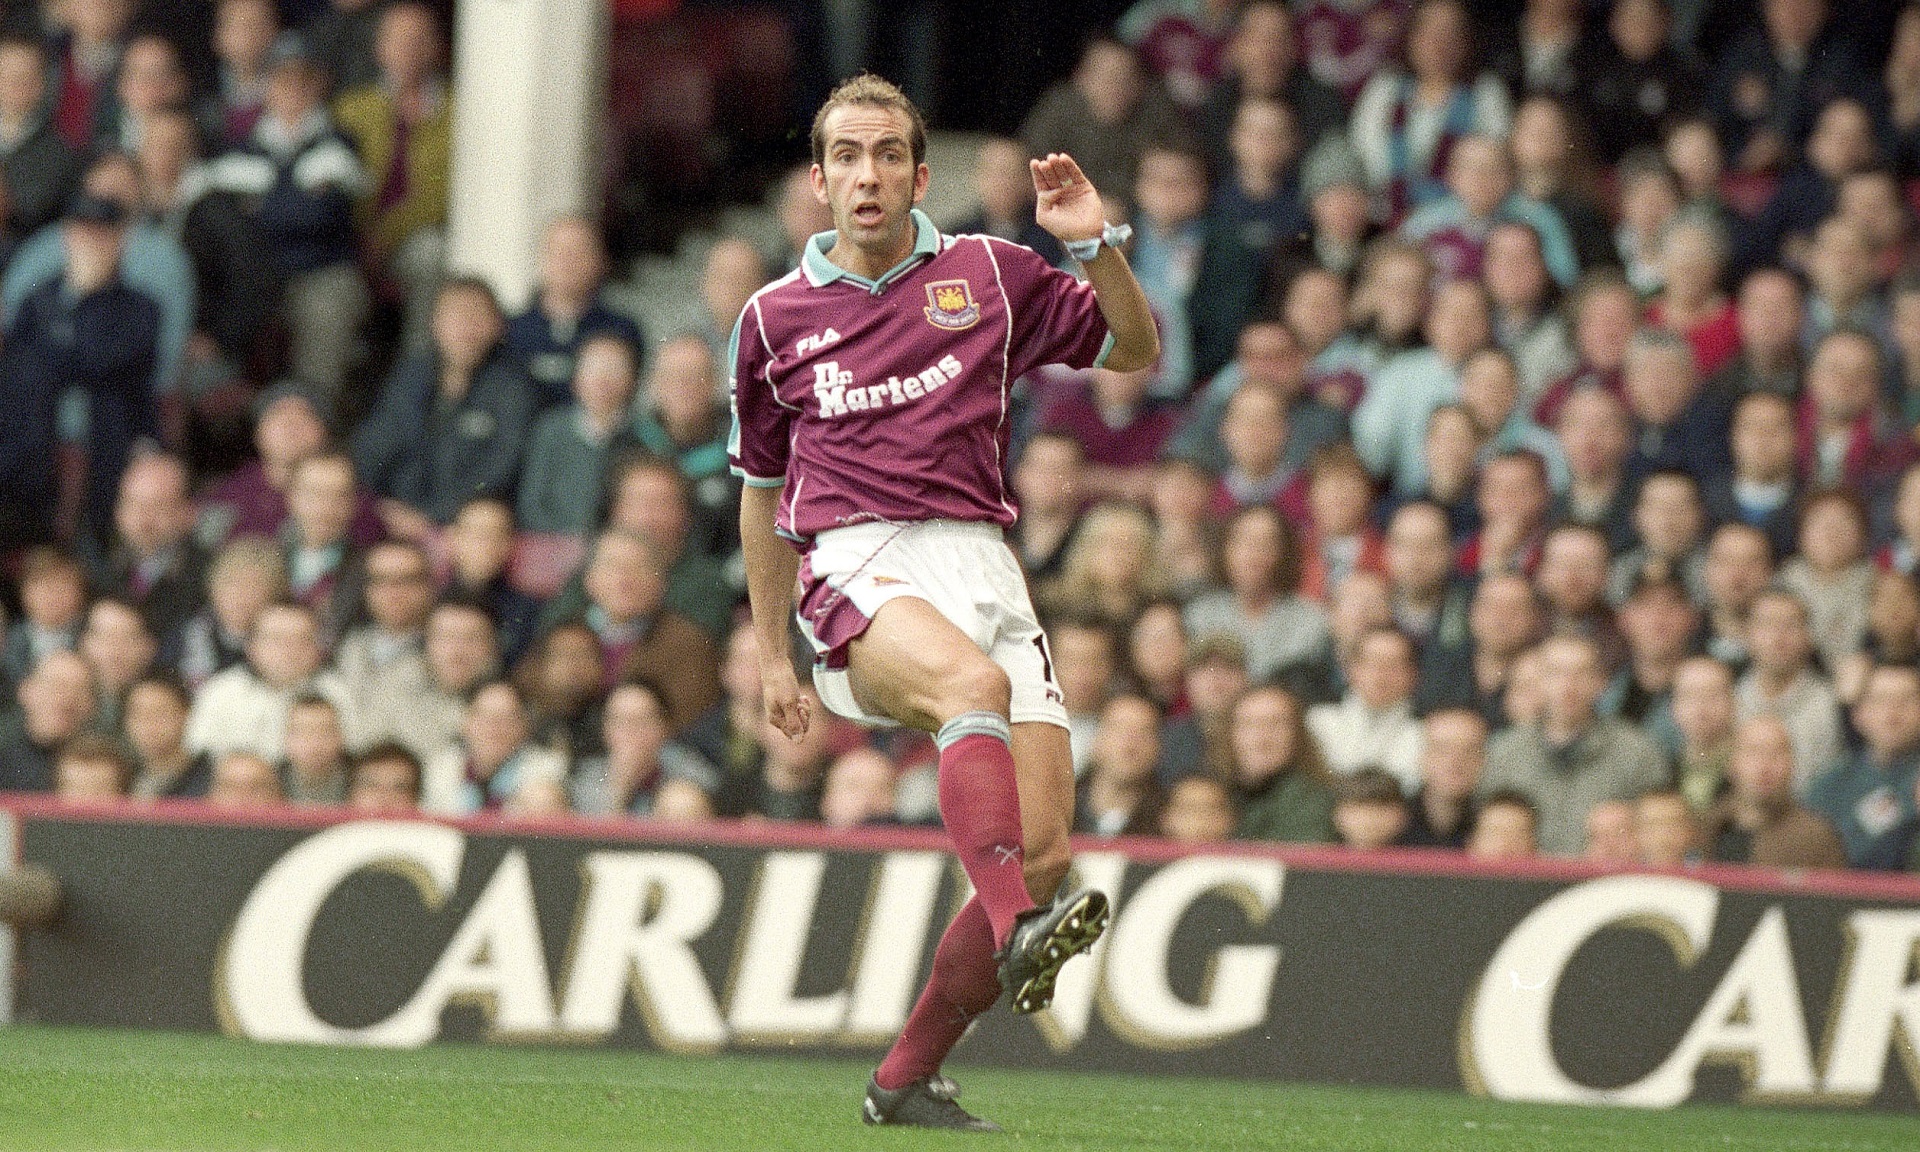 On This Day March 26: Celebrating 20 years since Paolo Di Canio scores amazing West Ham bicycle kick